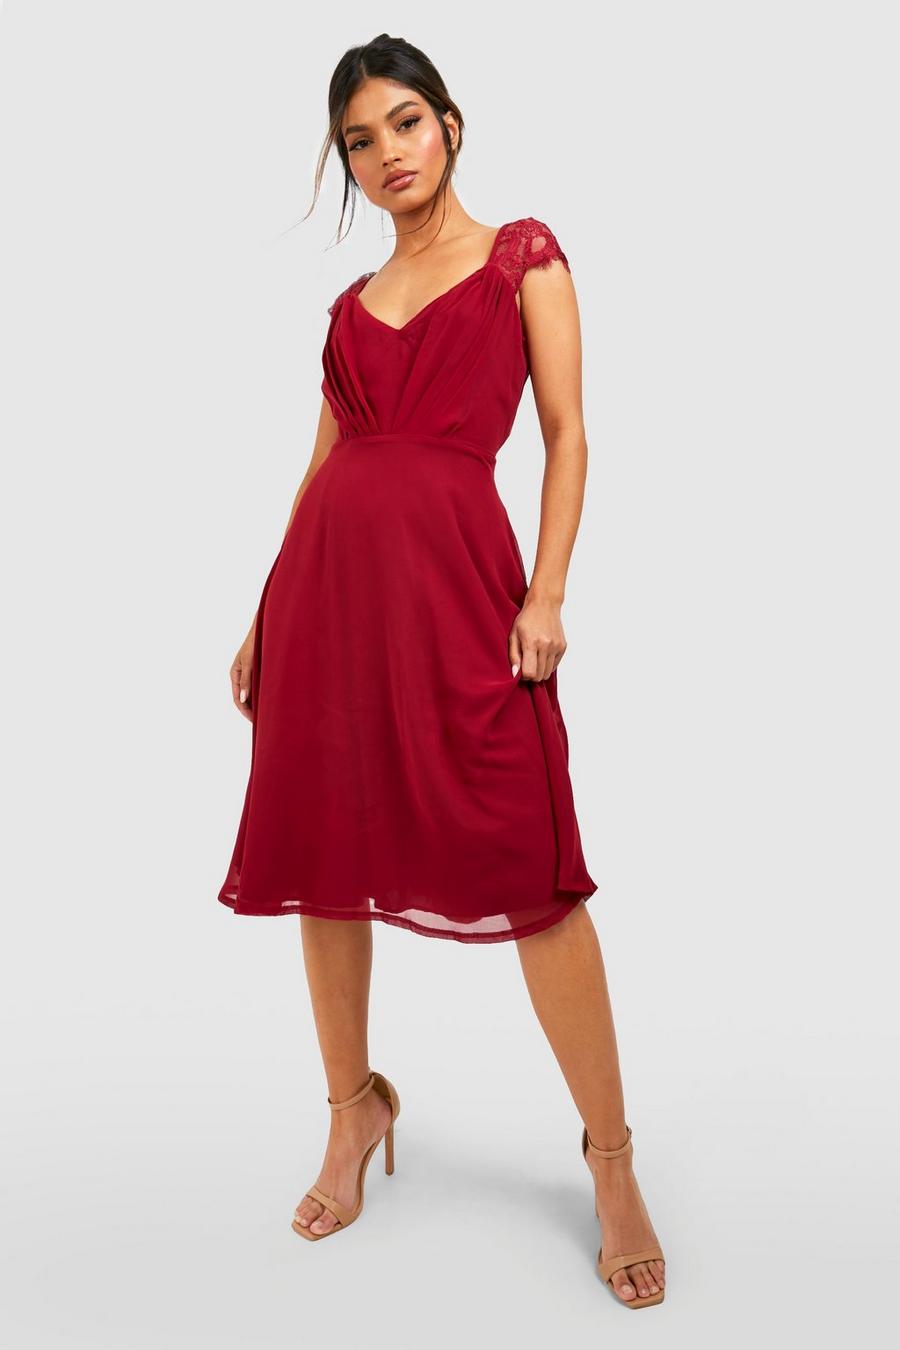 Berry red Chiffon Lace Midi Skater Bridesmaid Dress image number 1